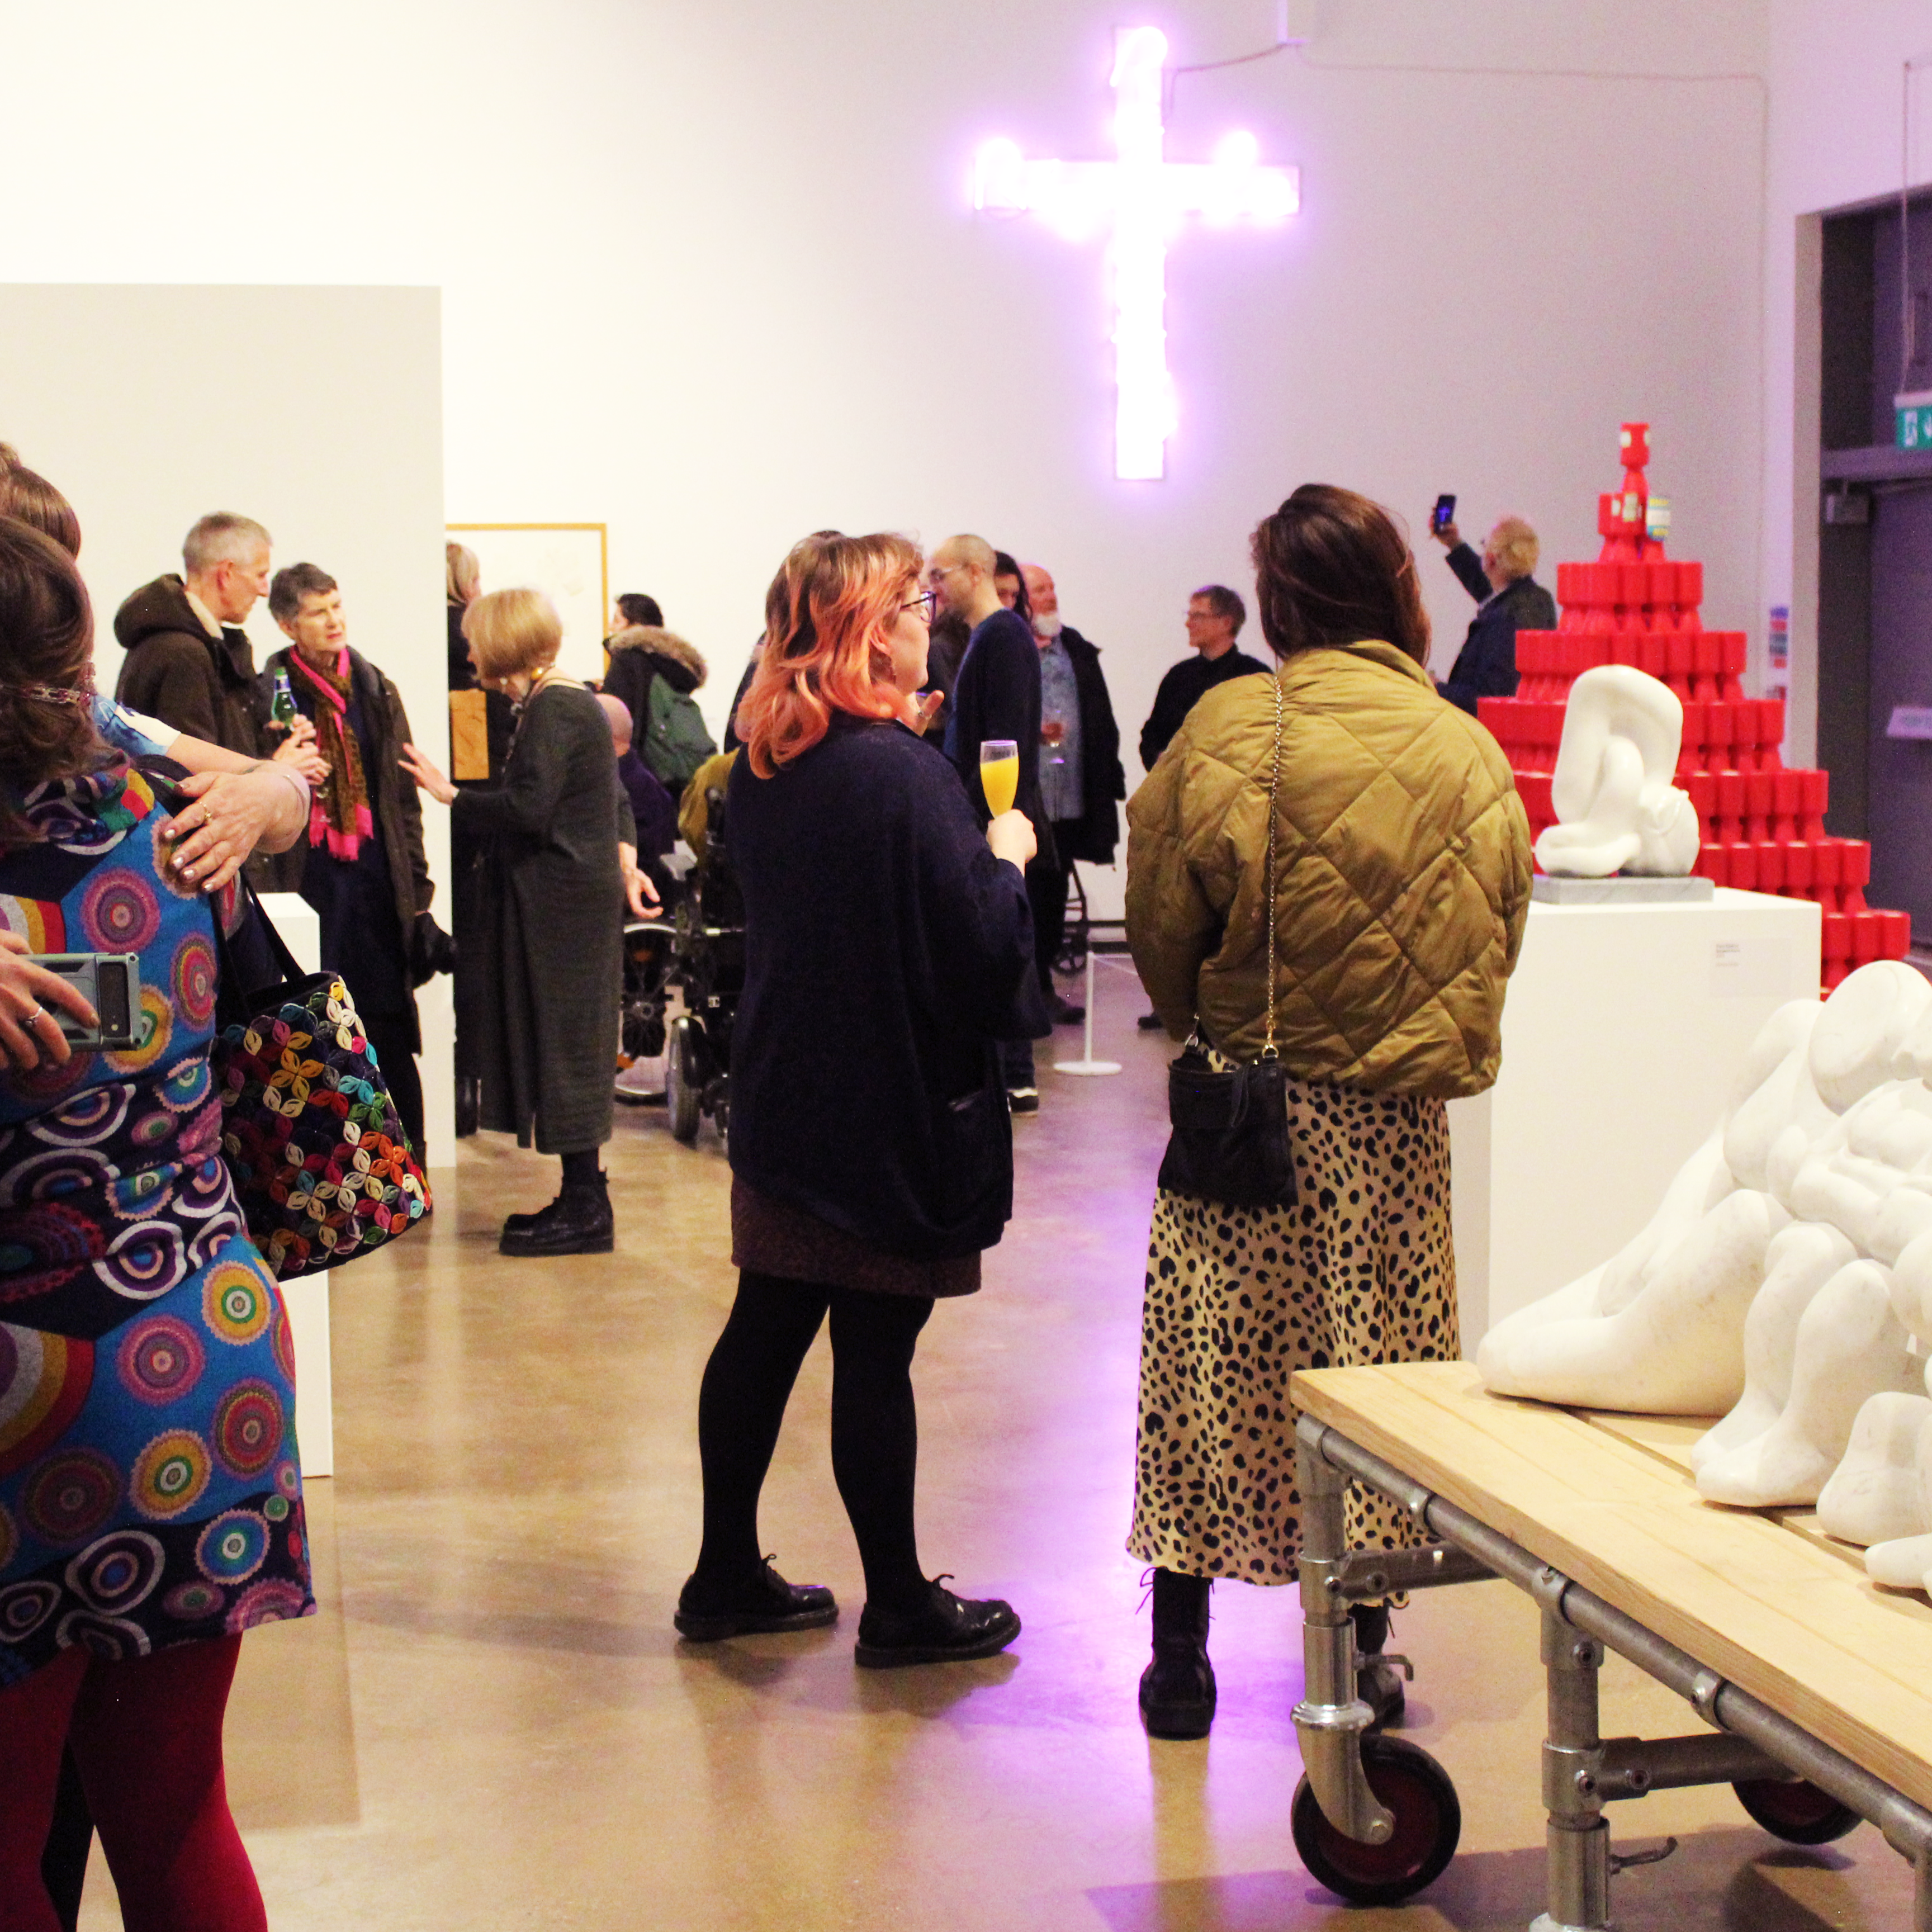 A range of people in Gallery 1 looking at artwork, such as carved marble, neon crosses and pyramids made from red charity boxes.